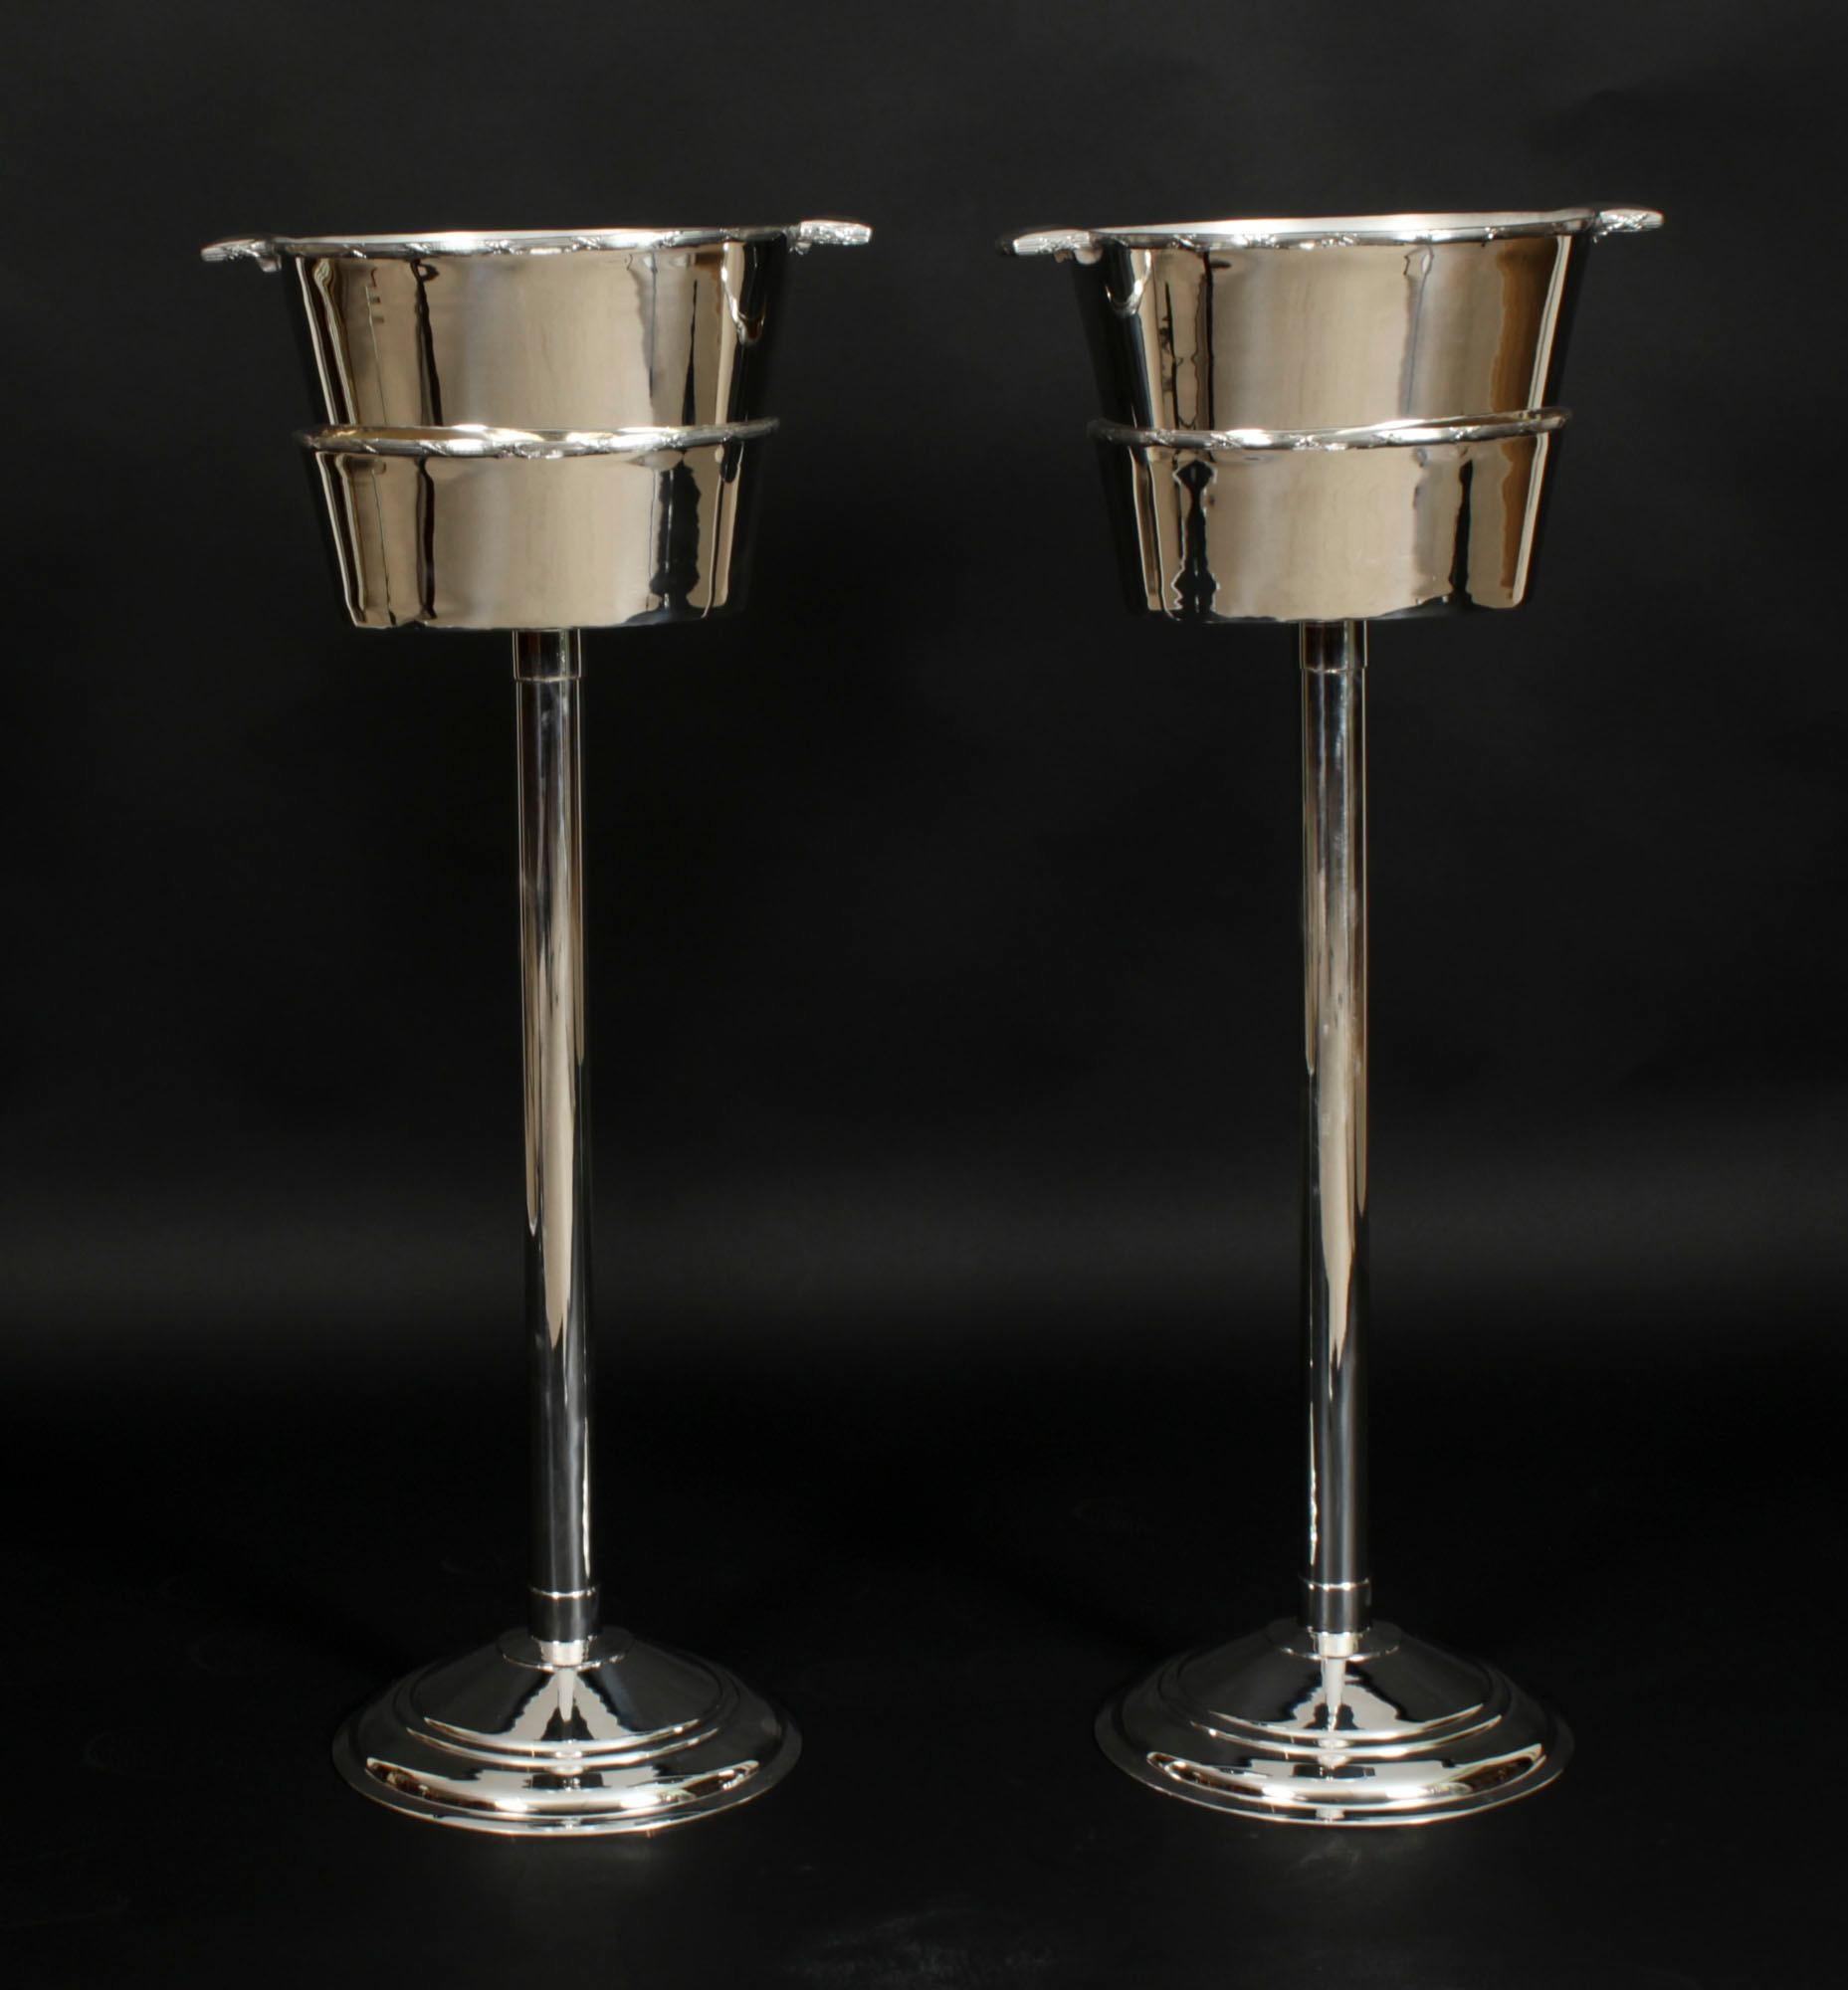 This is a fabulous antique pair of silver plated champagne coolers on stands bearing the makers mark of the renowned silversmith,  Mappin & Webb, circa 1900 in date.

They are of beautiful design and are elegant and contemporary at the same